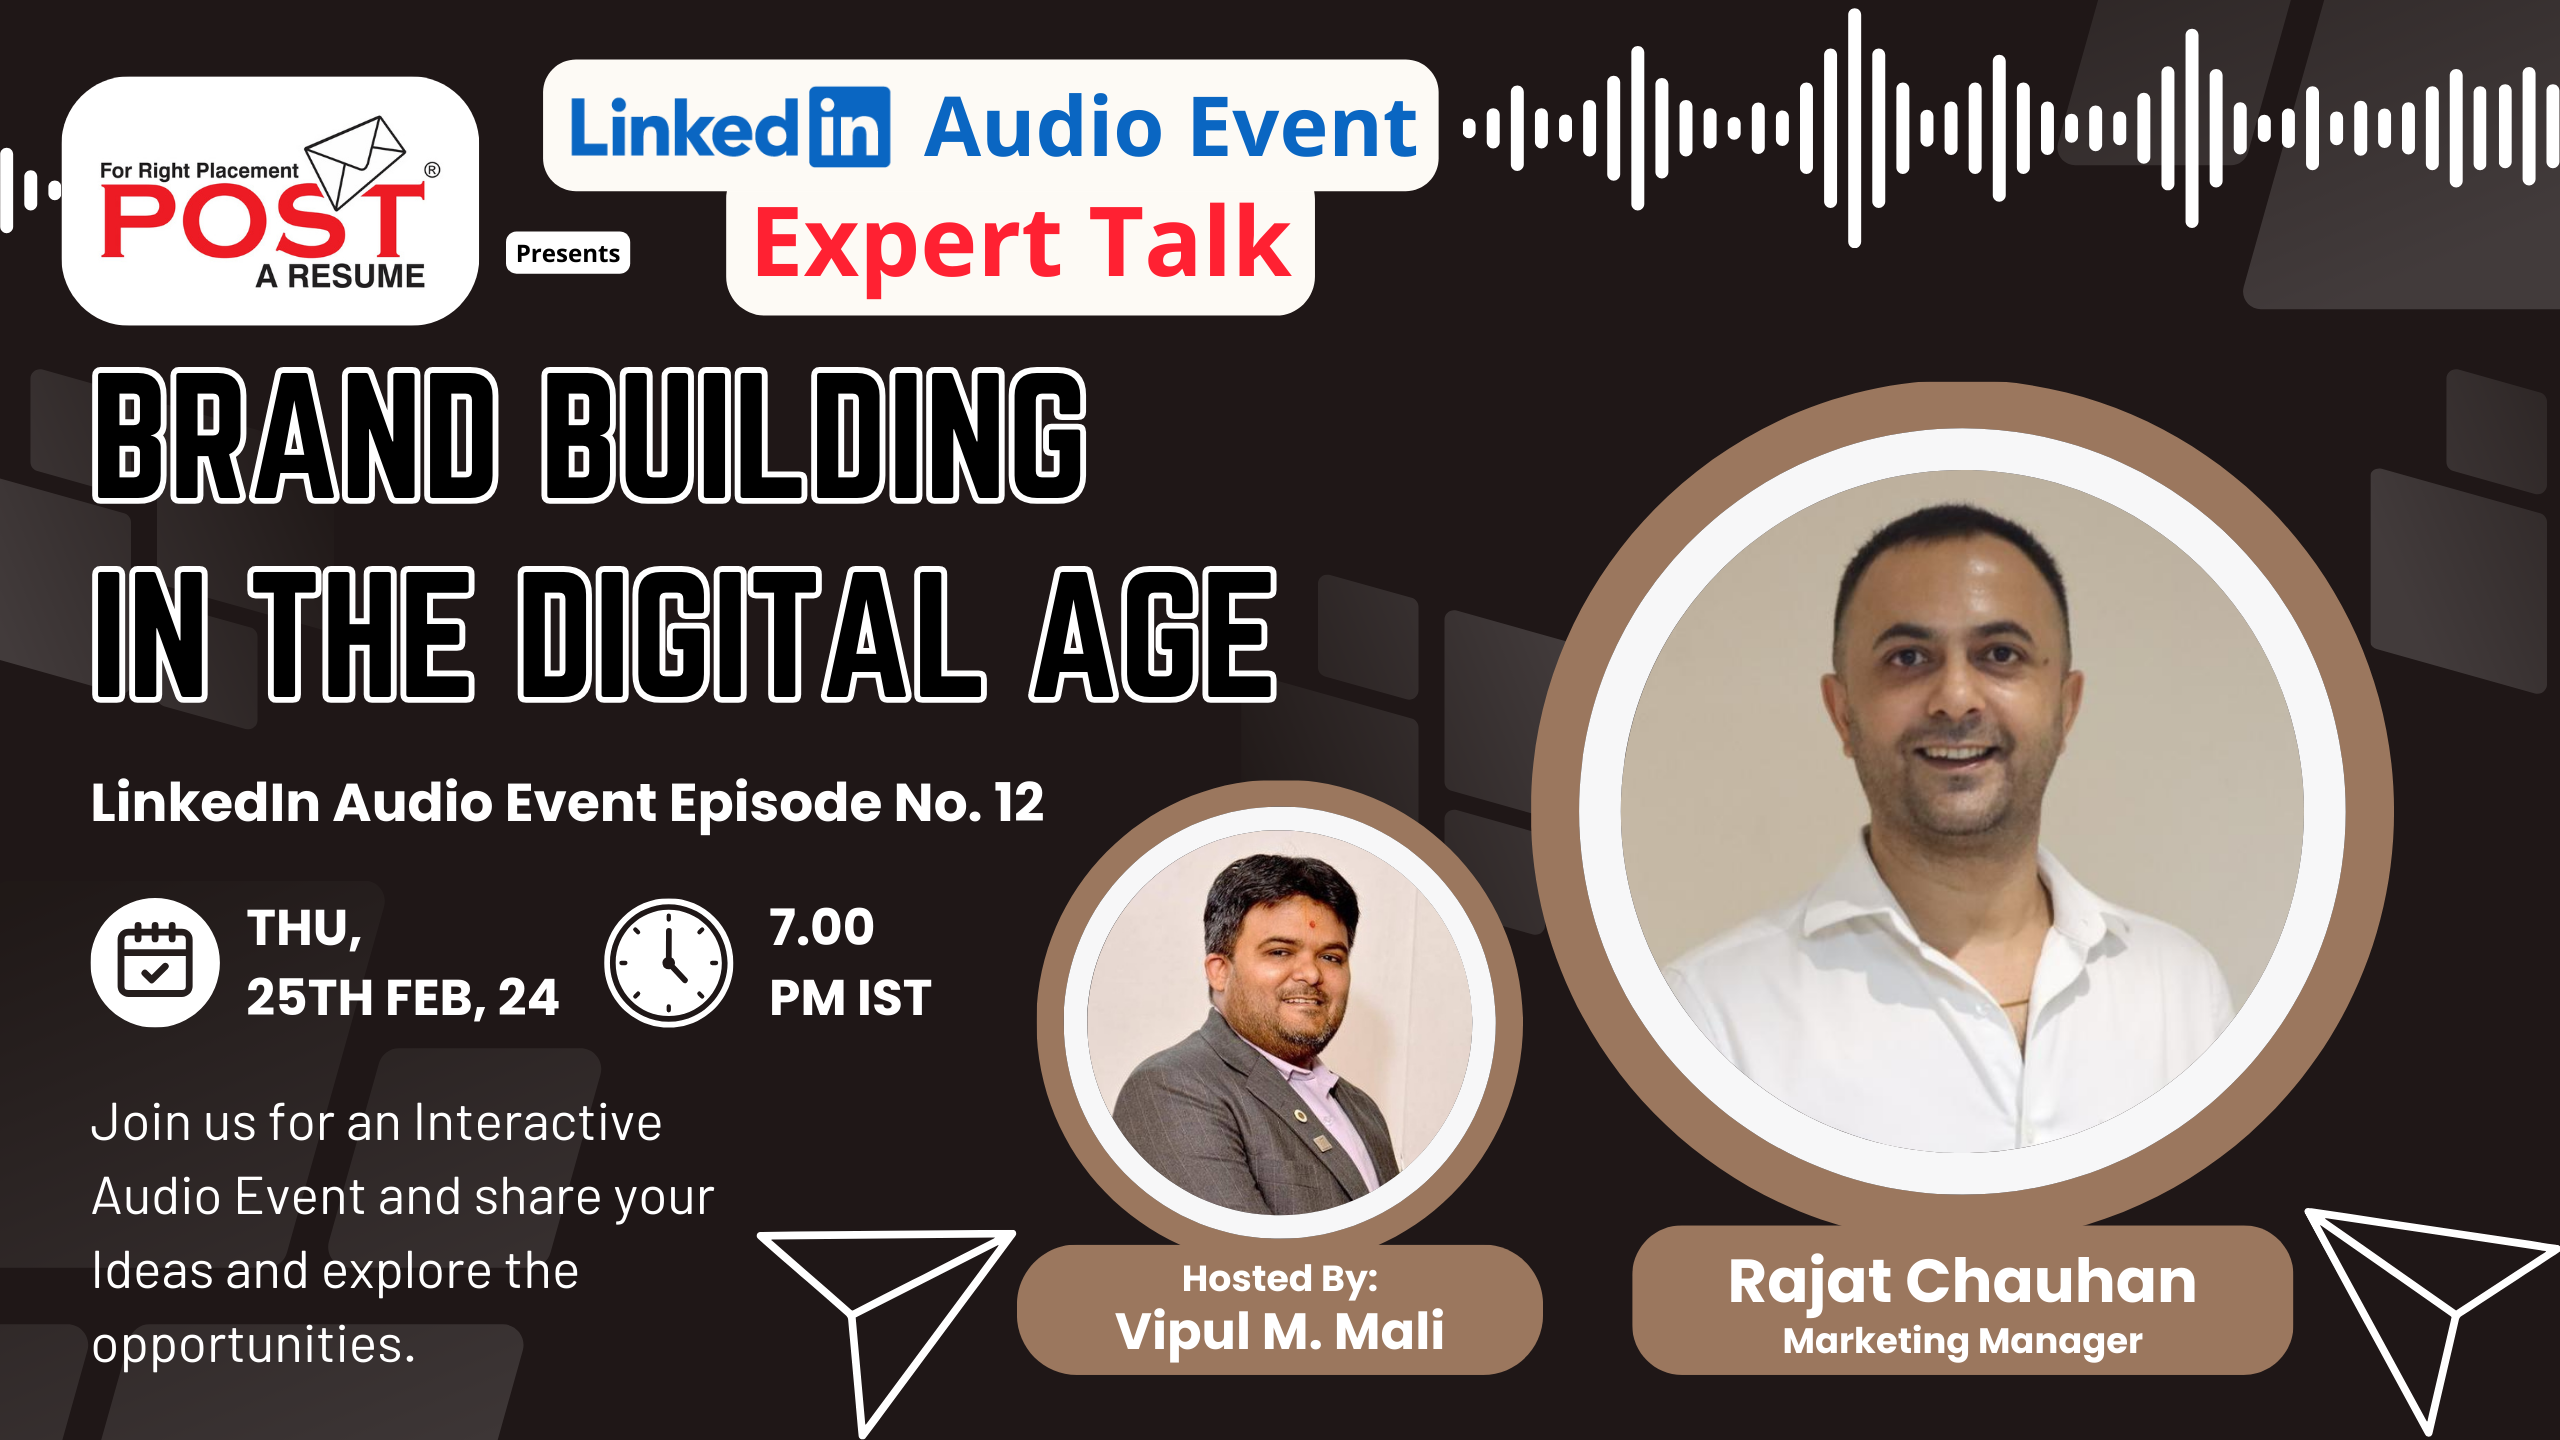 Expert Talk Audio Event Ep. 12 with Rajat Chauhan on Brand Building in the Digital Age